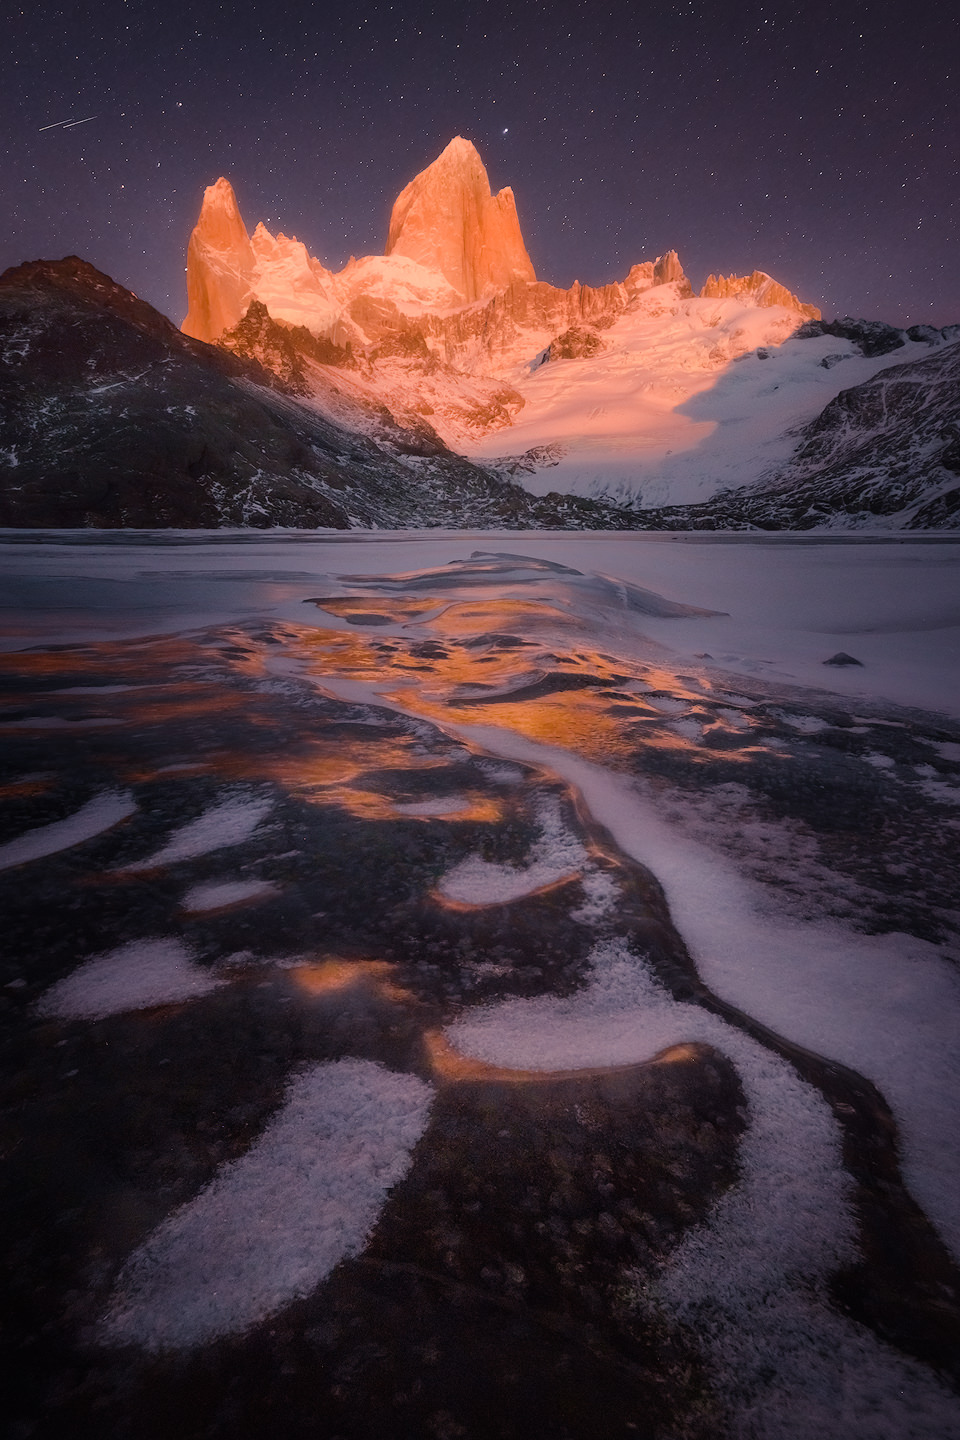 Fitz Roy glowing red during a winter moonrise behind frozen Laguna de los Tres .